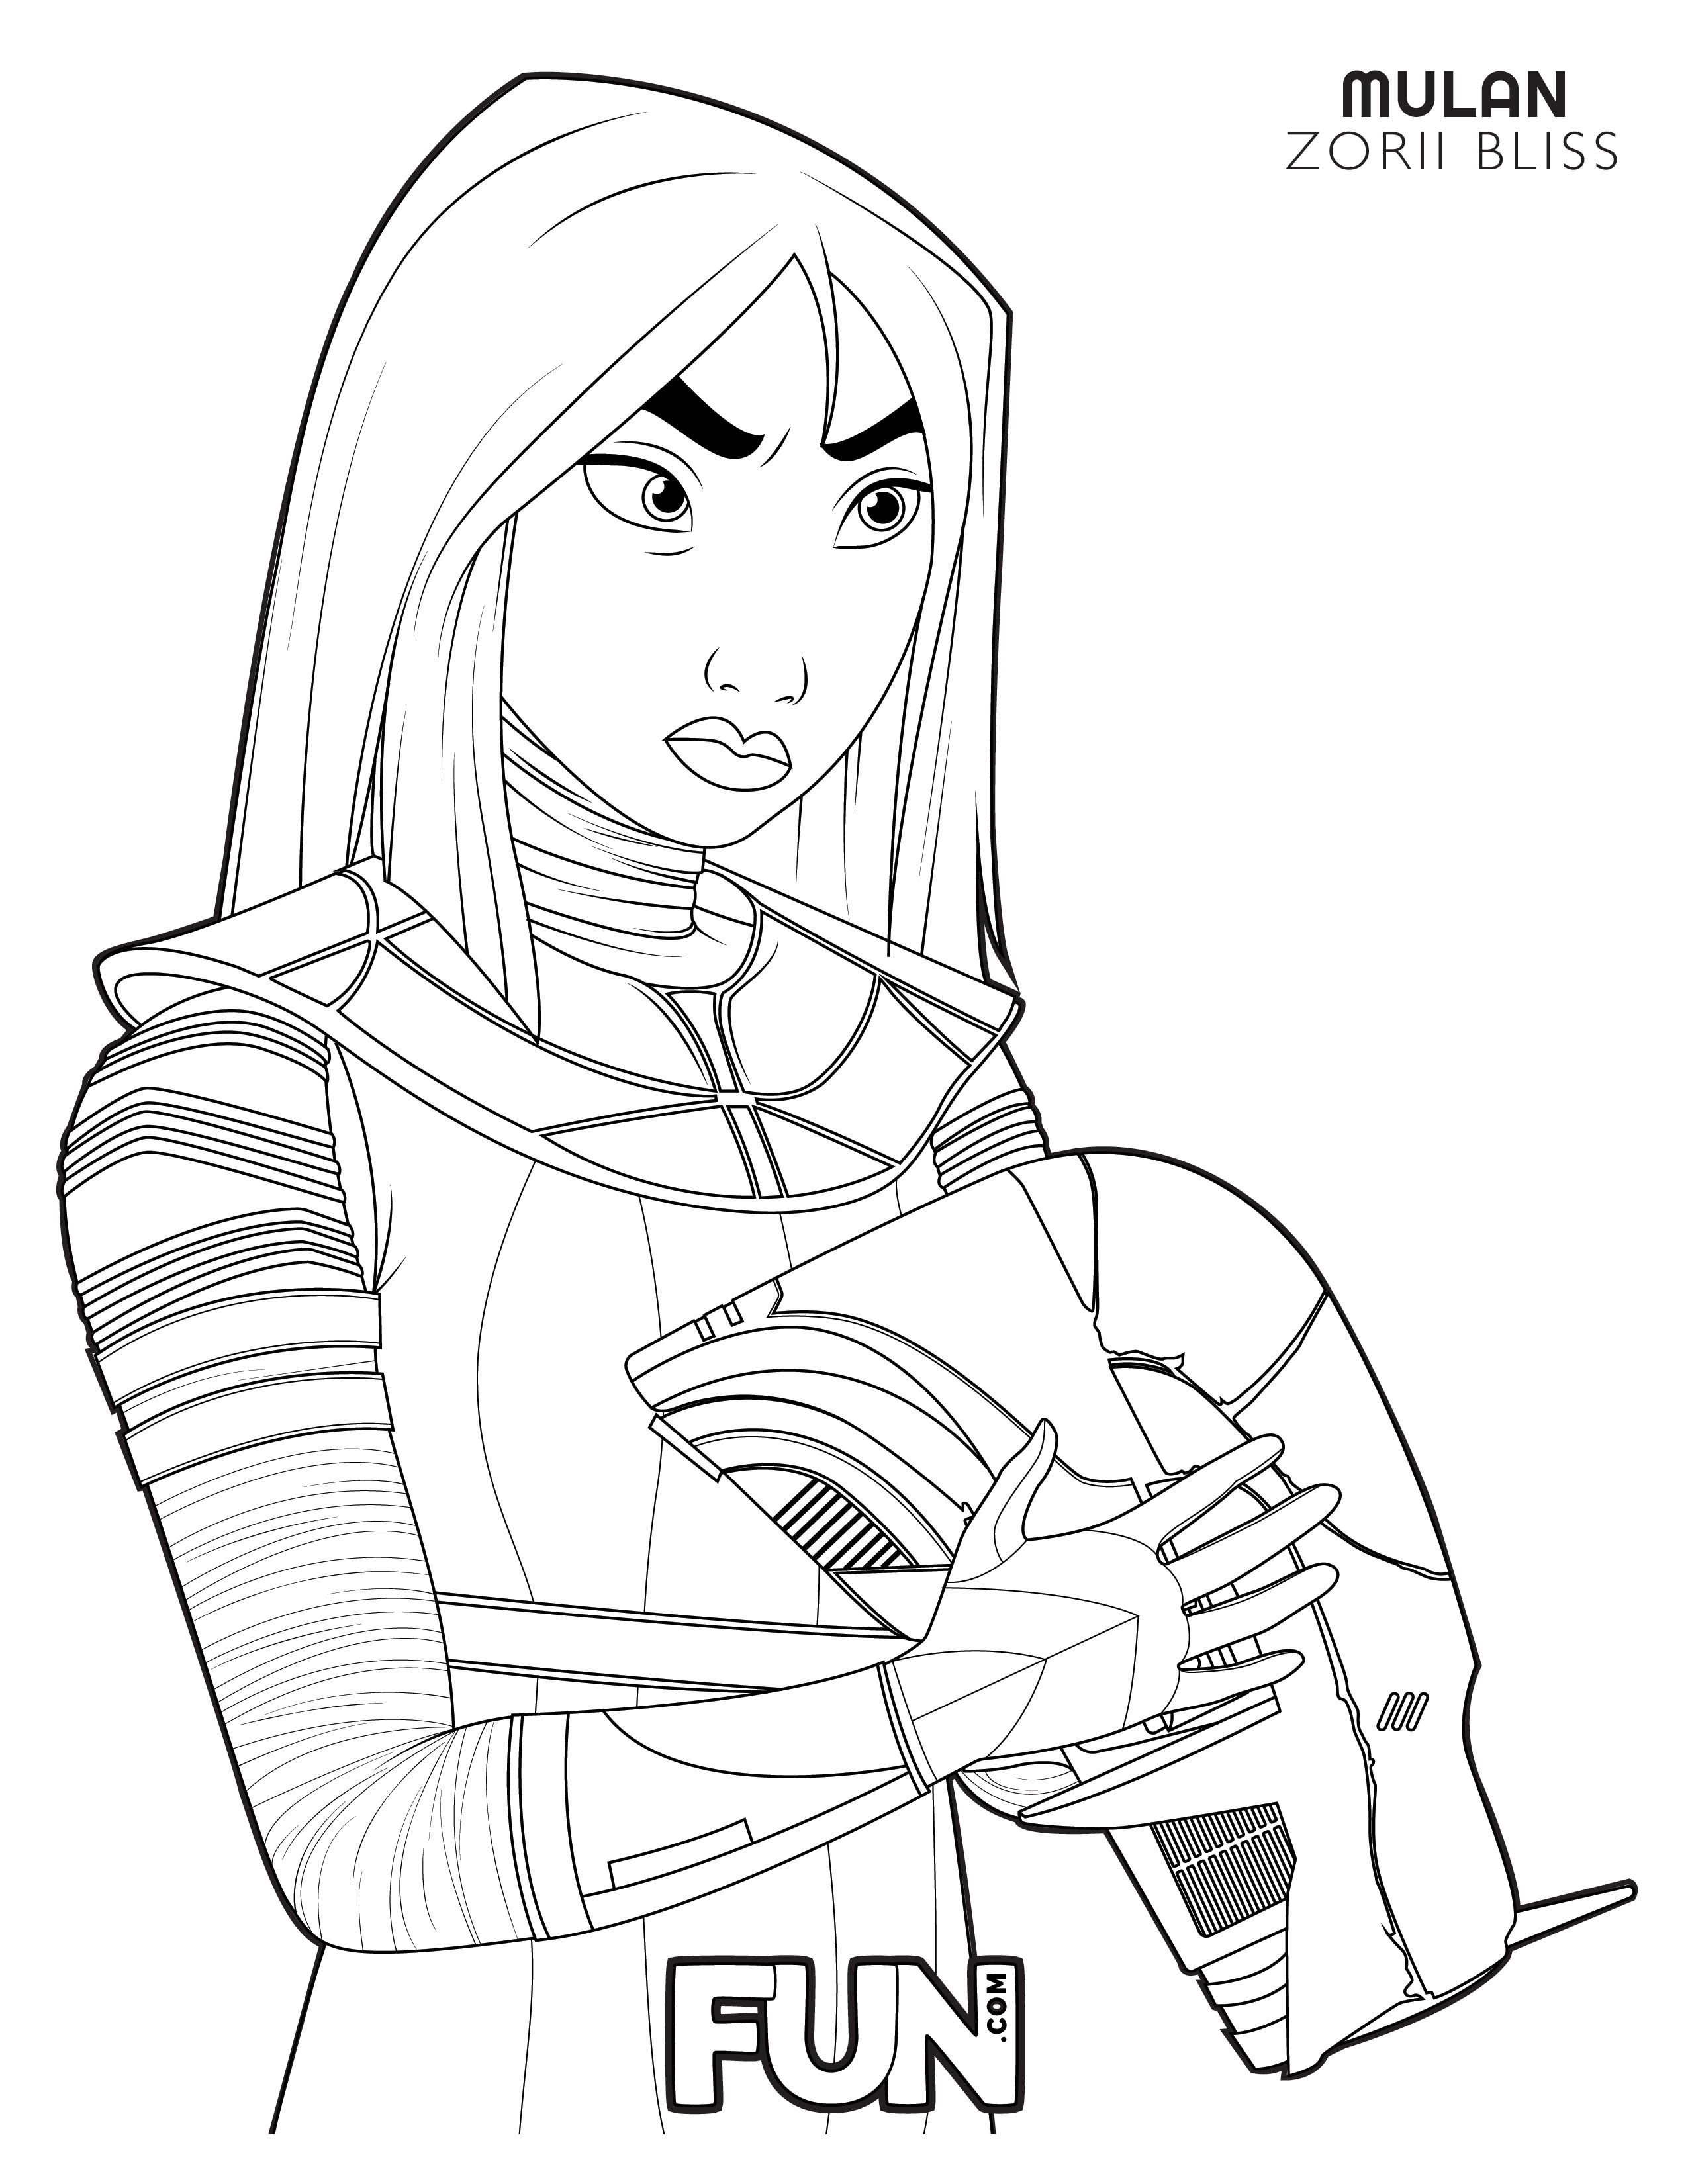 Mulan Zorii Bliss Coloring Page